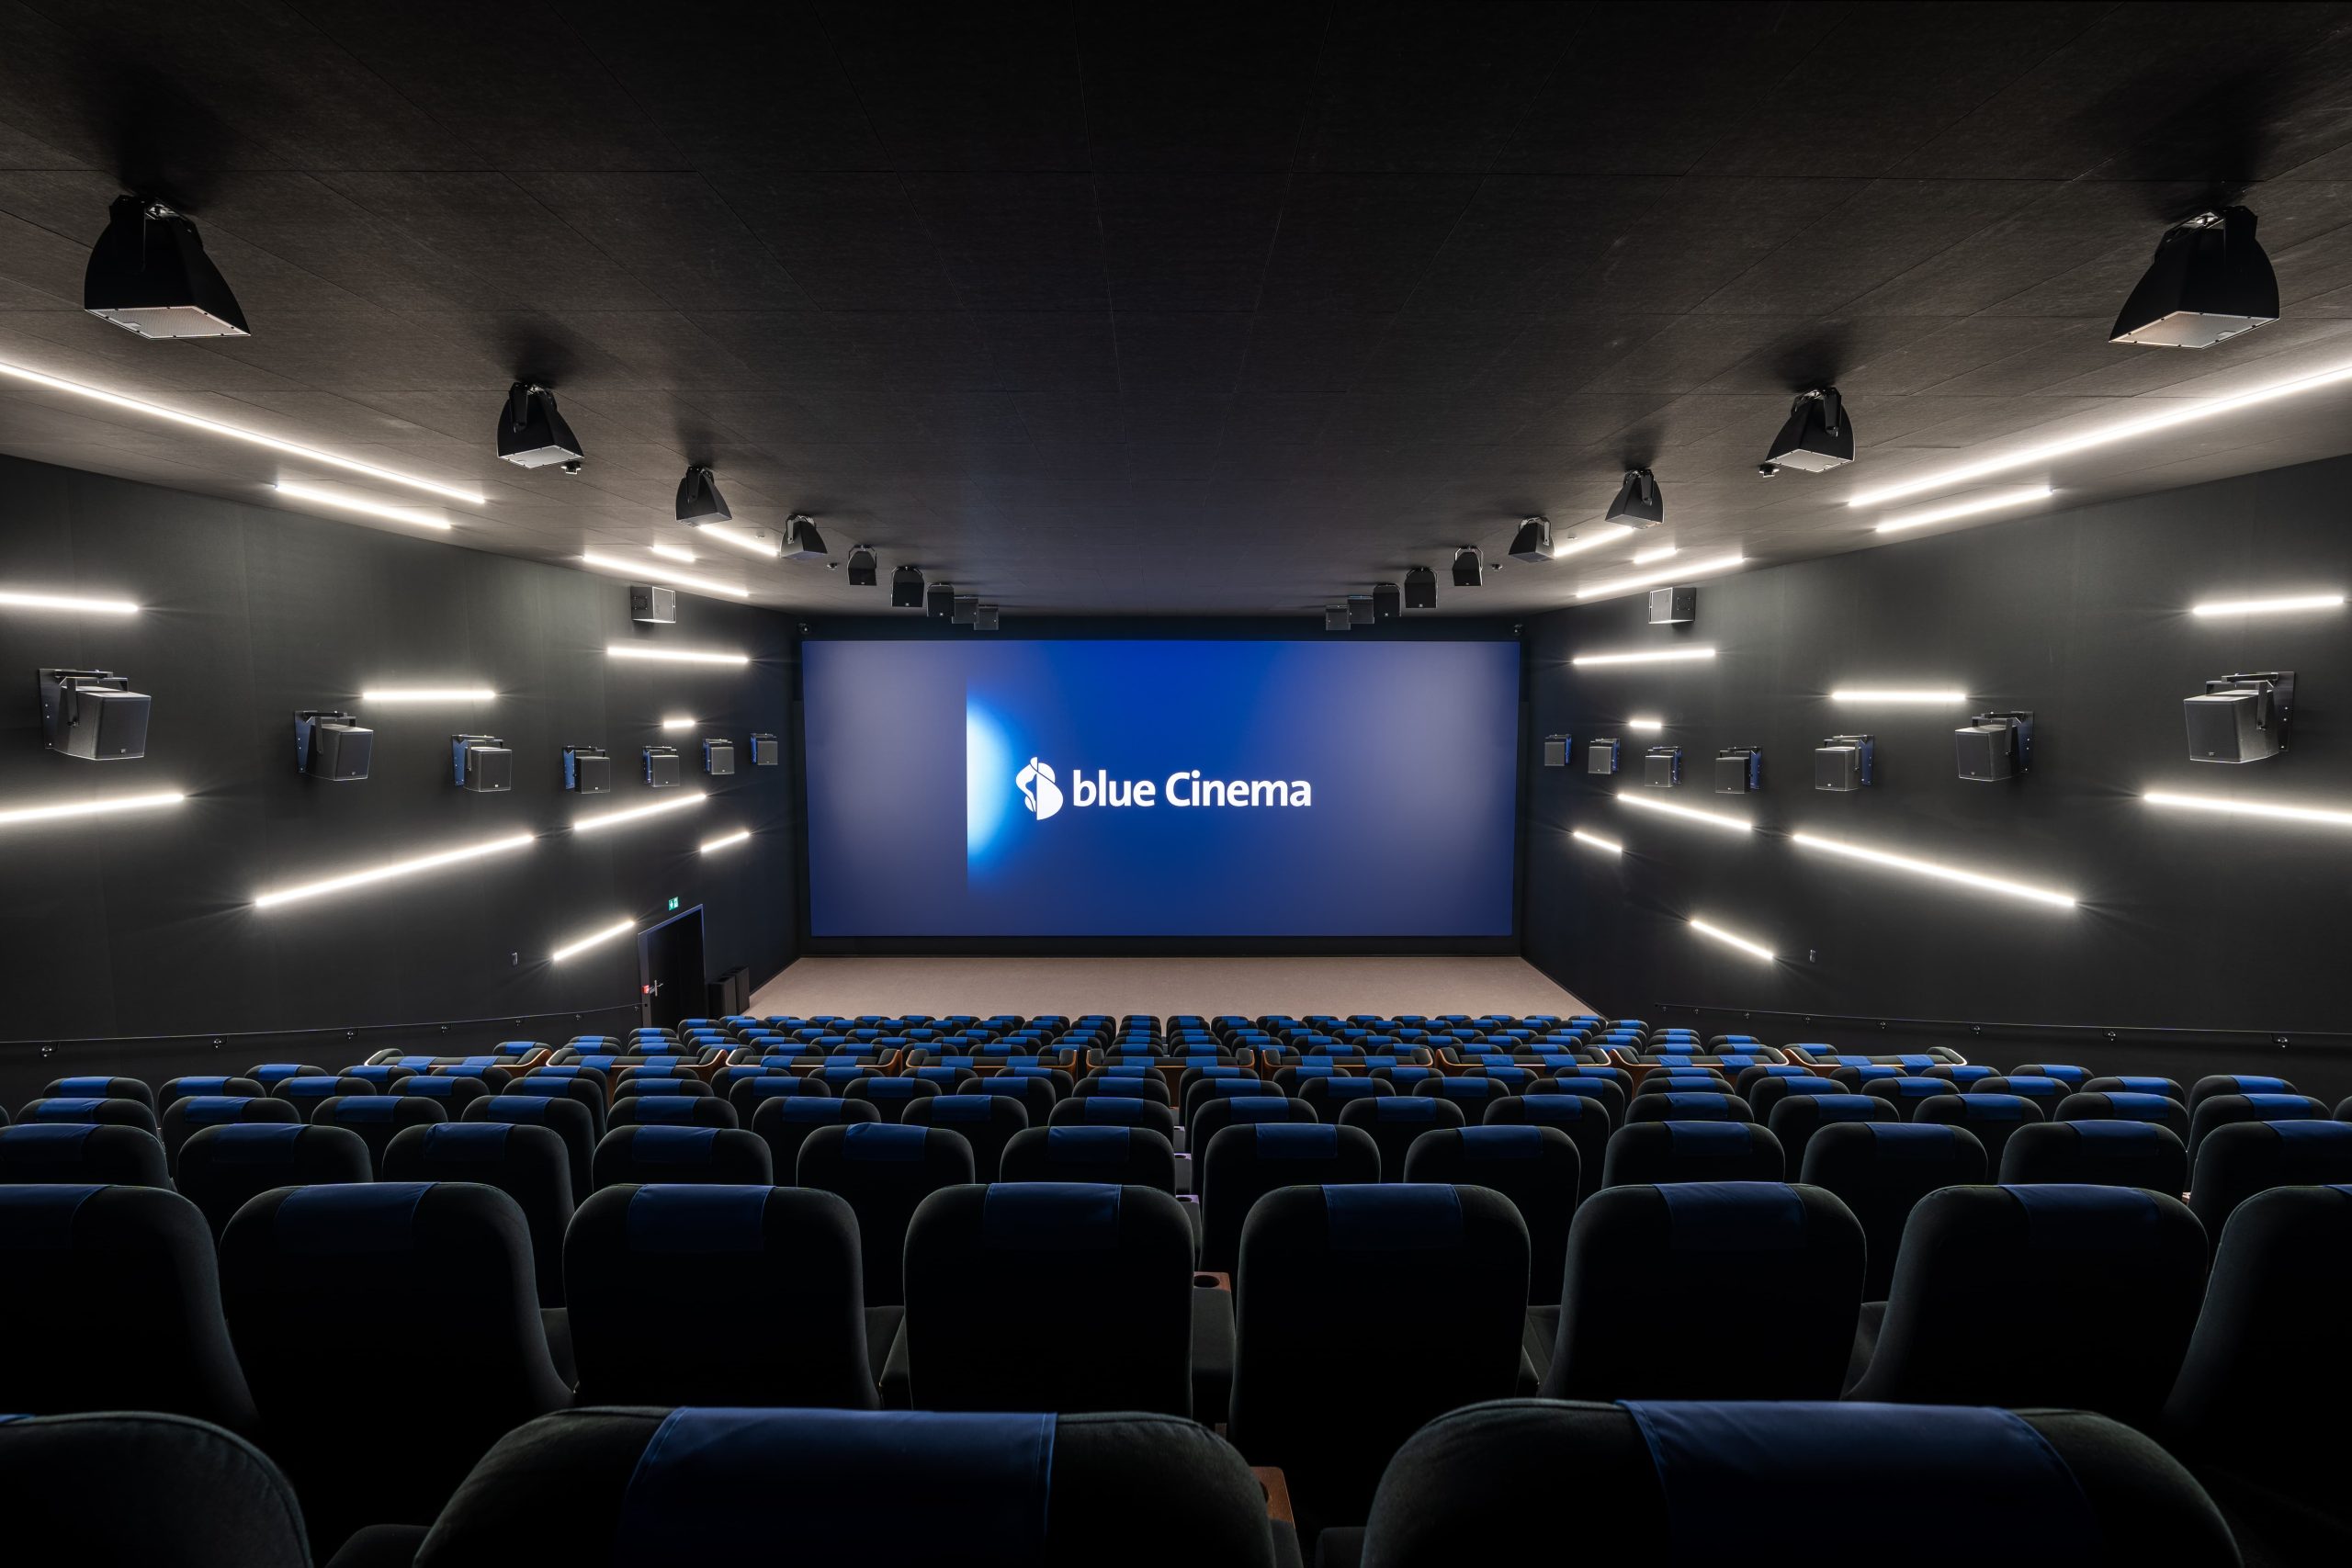 Exclusive private screening at blue Cinema for private and corporate events.